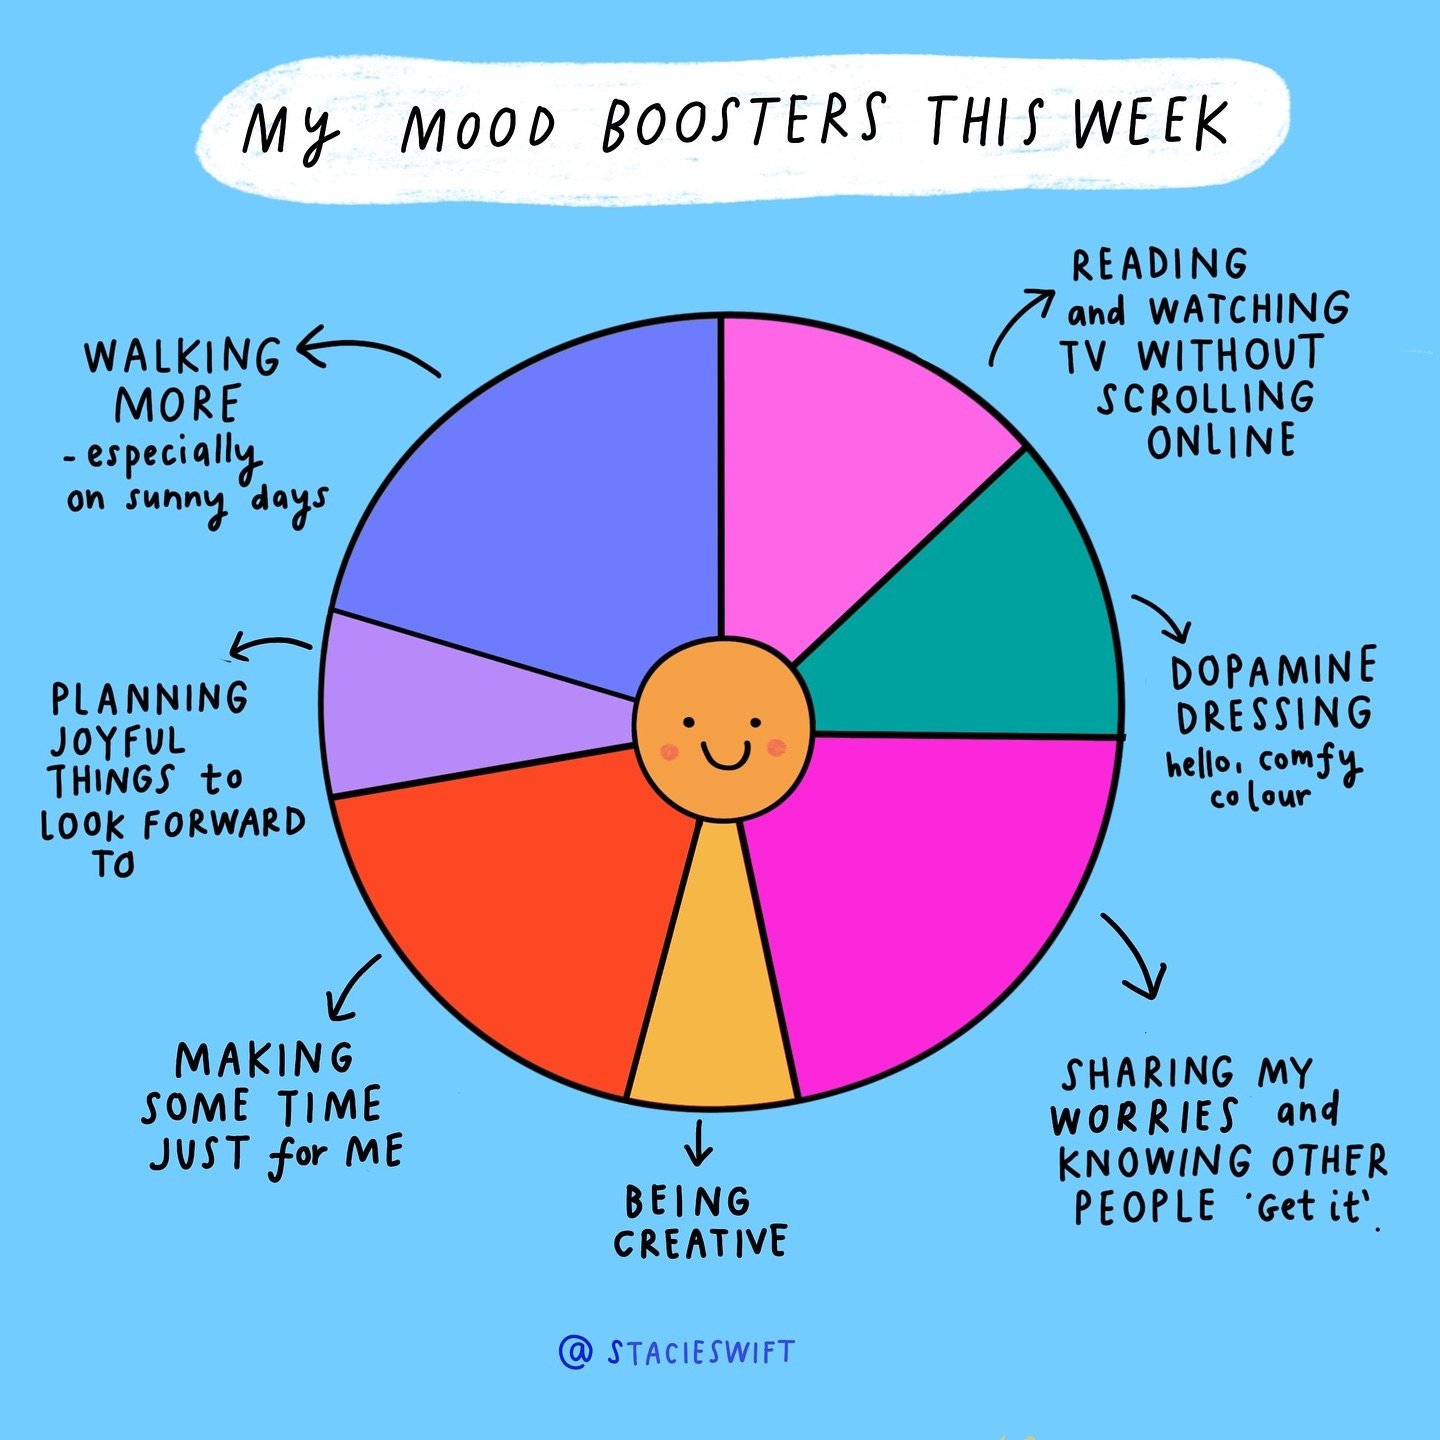 ✨ My Mood Boosters this week &hellip; what are yours? ✨

Some of the things that have lifted my mood:

🌞 Choosing to walk even when the car is more convenient 
🌈 Wearing clothes that make me smile
💖 Focusing instead of scrolling - I enjoyed watchi